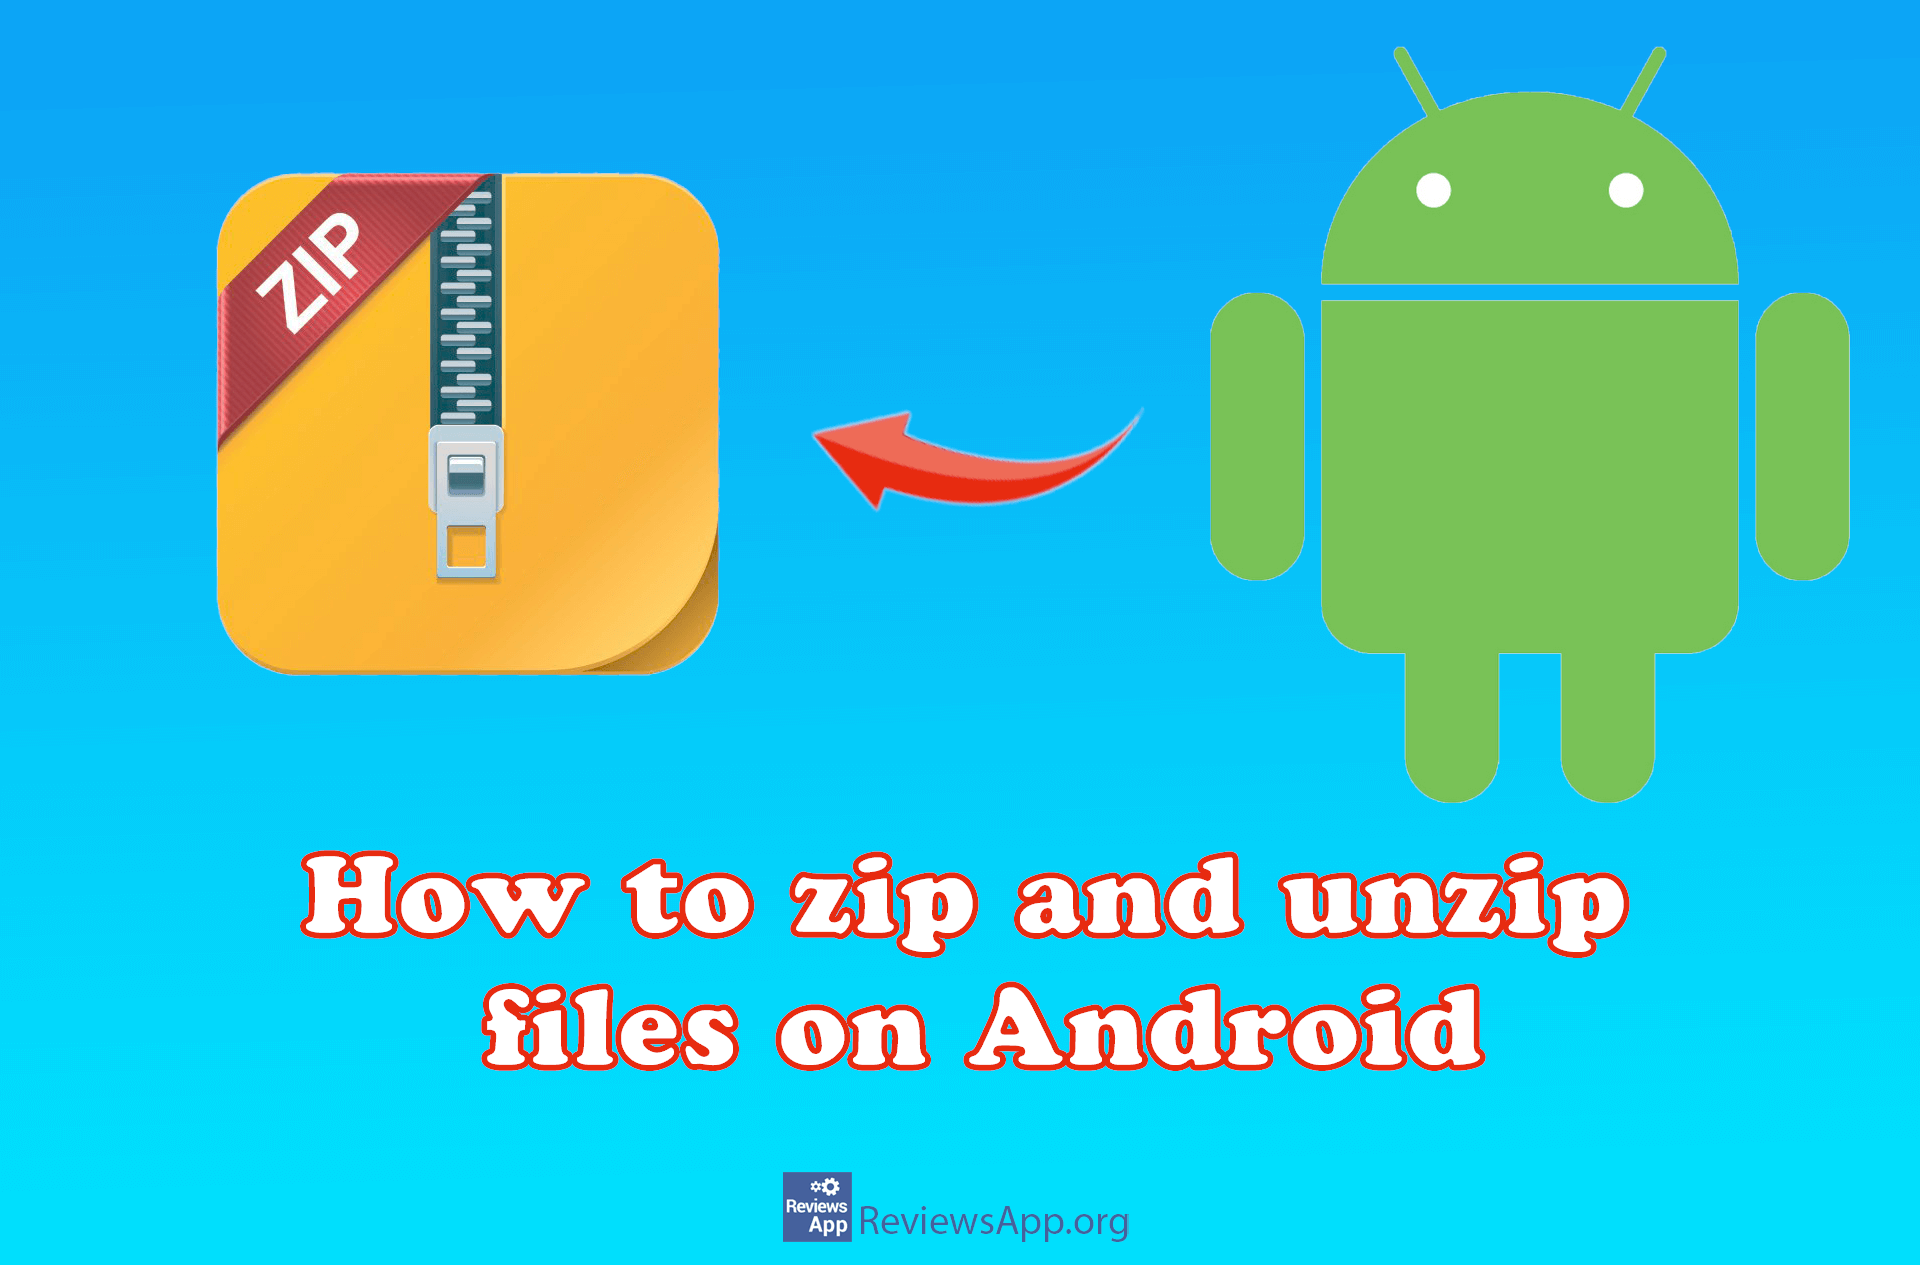 How to zip and unzip files on Android